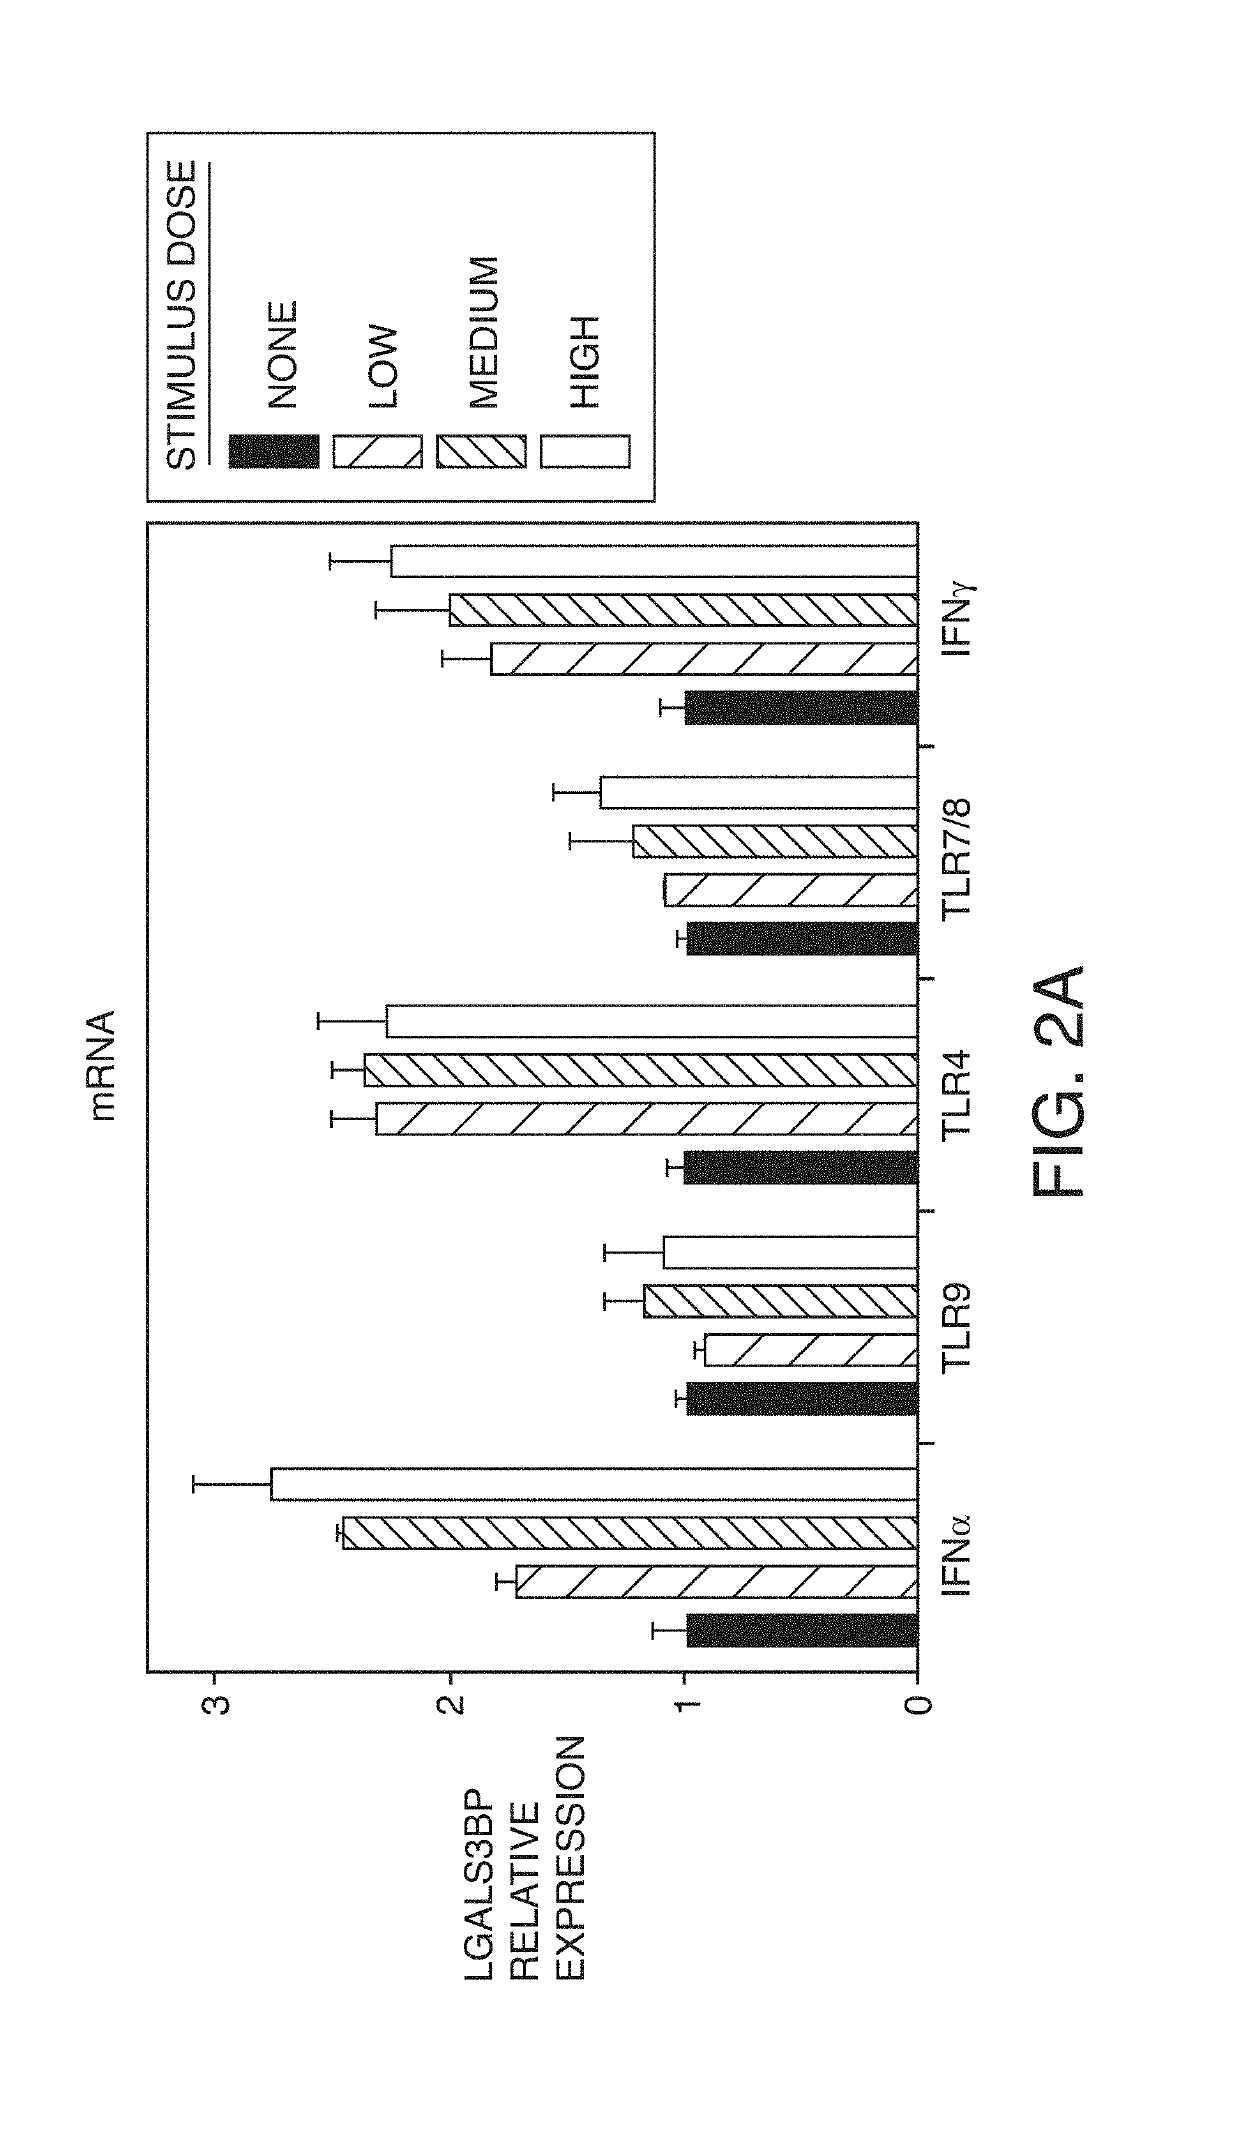 Methods for the use of galectin 3 binding protein detected in the urine for monitoring the severity and progression of lupus nephritis